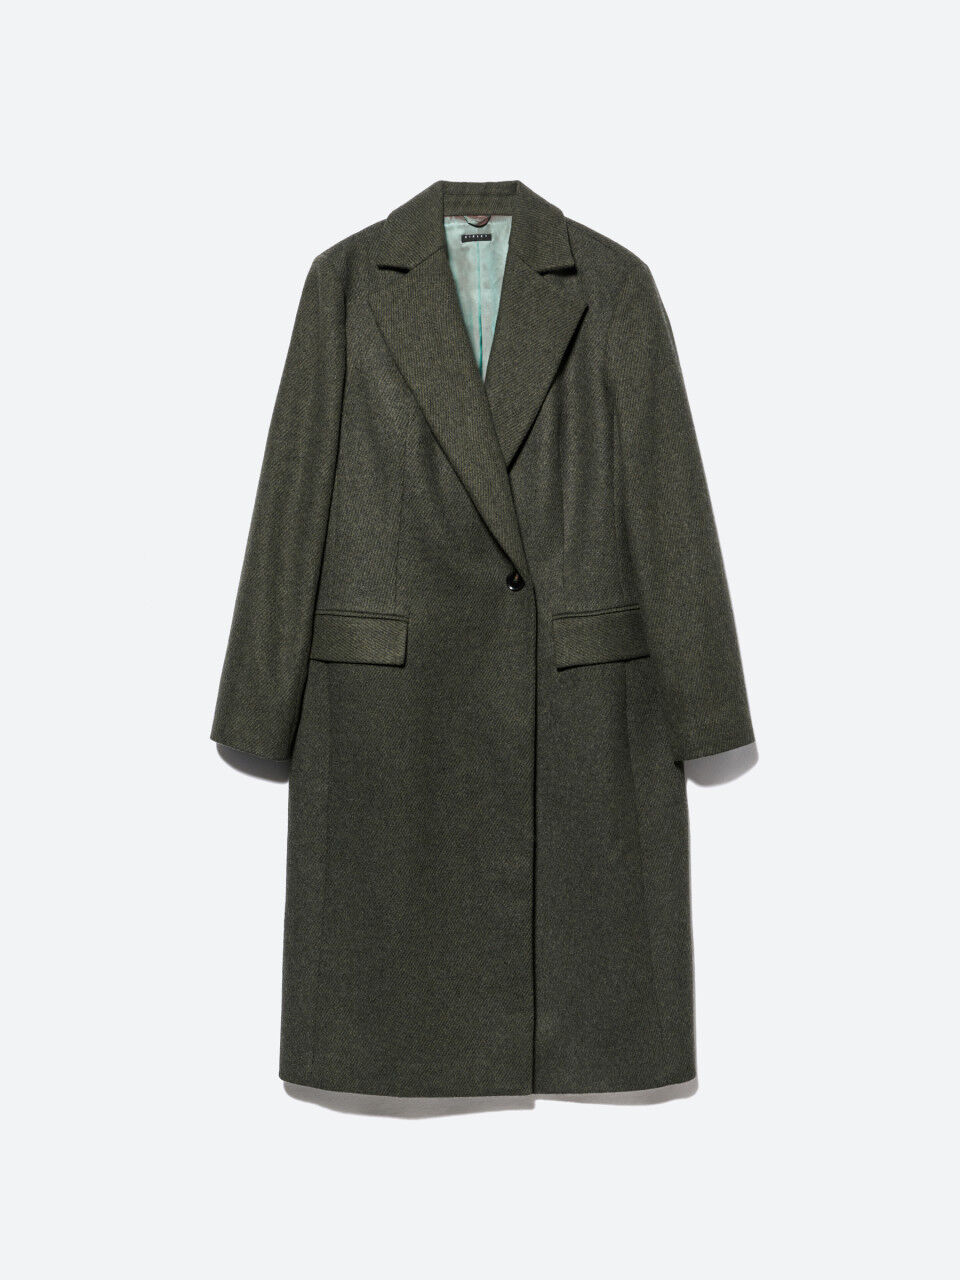 Women's Spring and Winter Coats Collection 2022 | Sisley UK